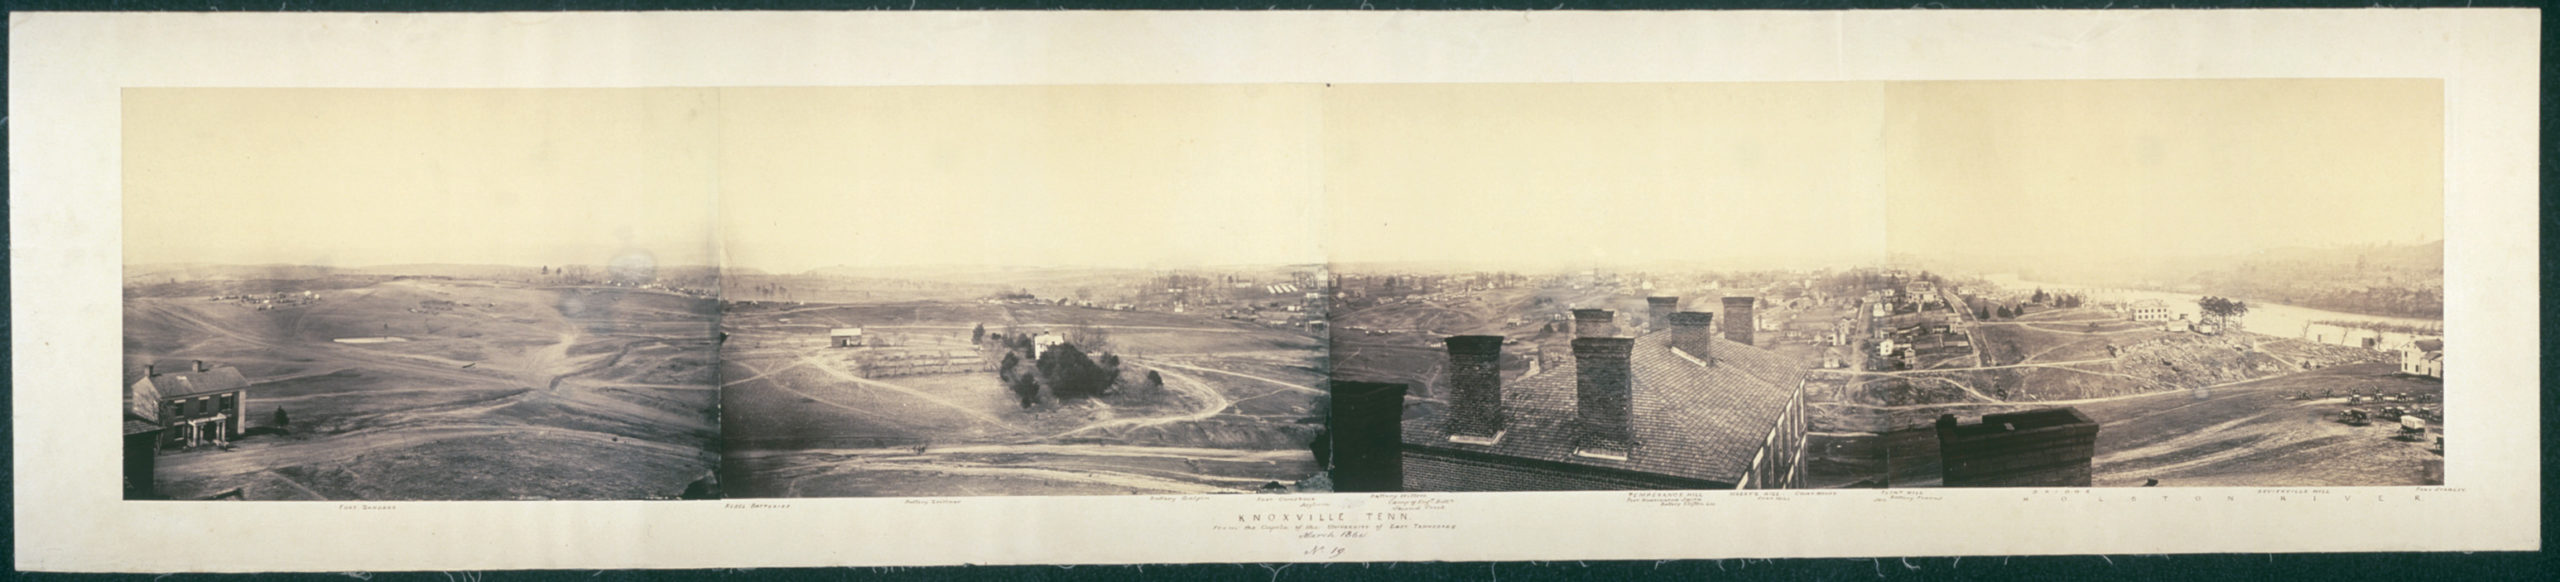 Knoxville panorama during the Civil War